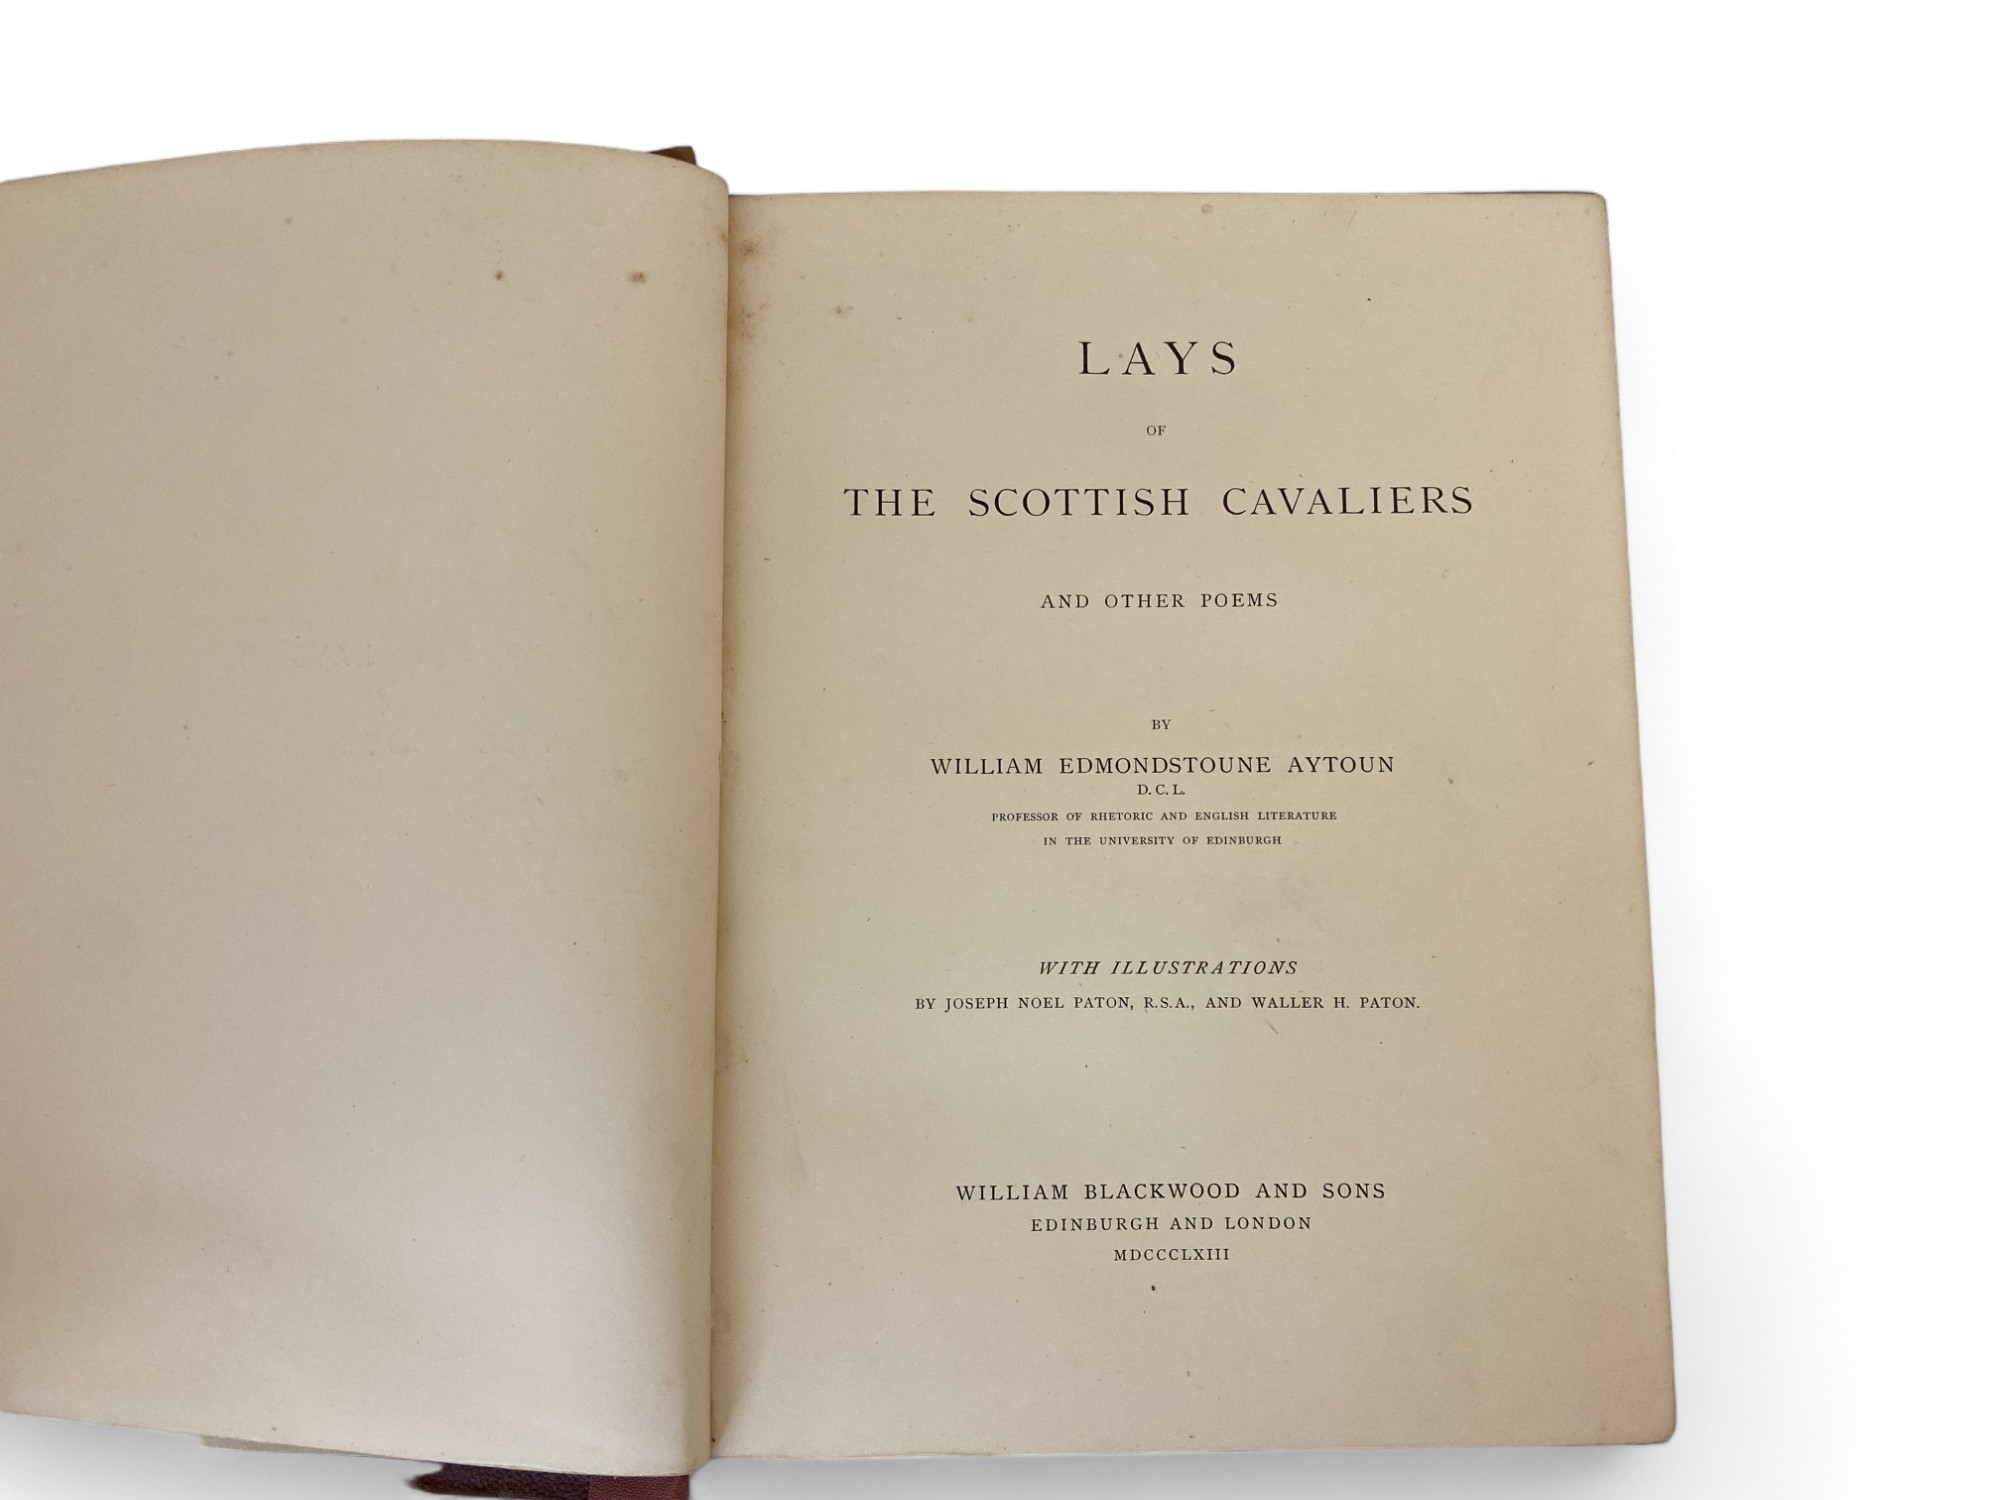 W.Edmondstoune Aytoun, D.C.L., 'Lays of the Scottish Cavaliers and Other Poems', illustrated by J. N - Image 4 of 5